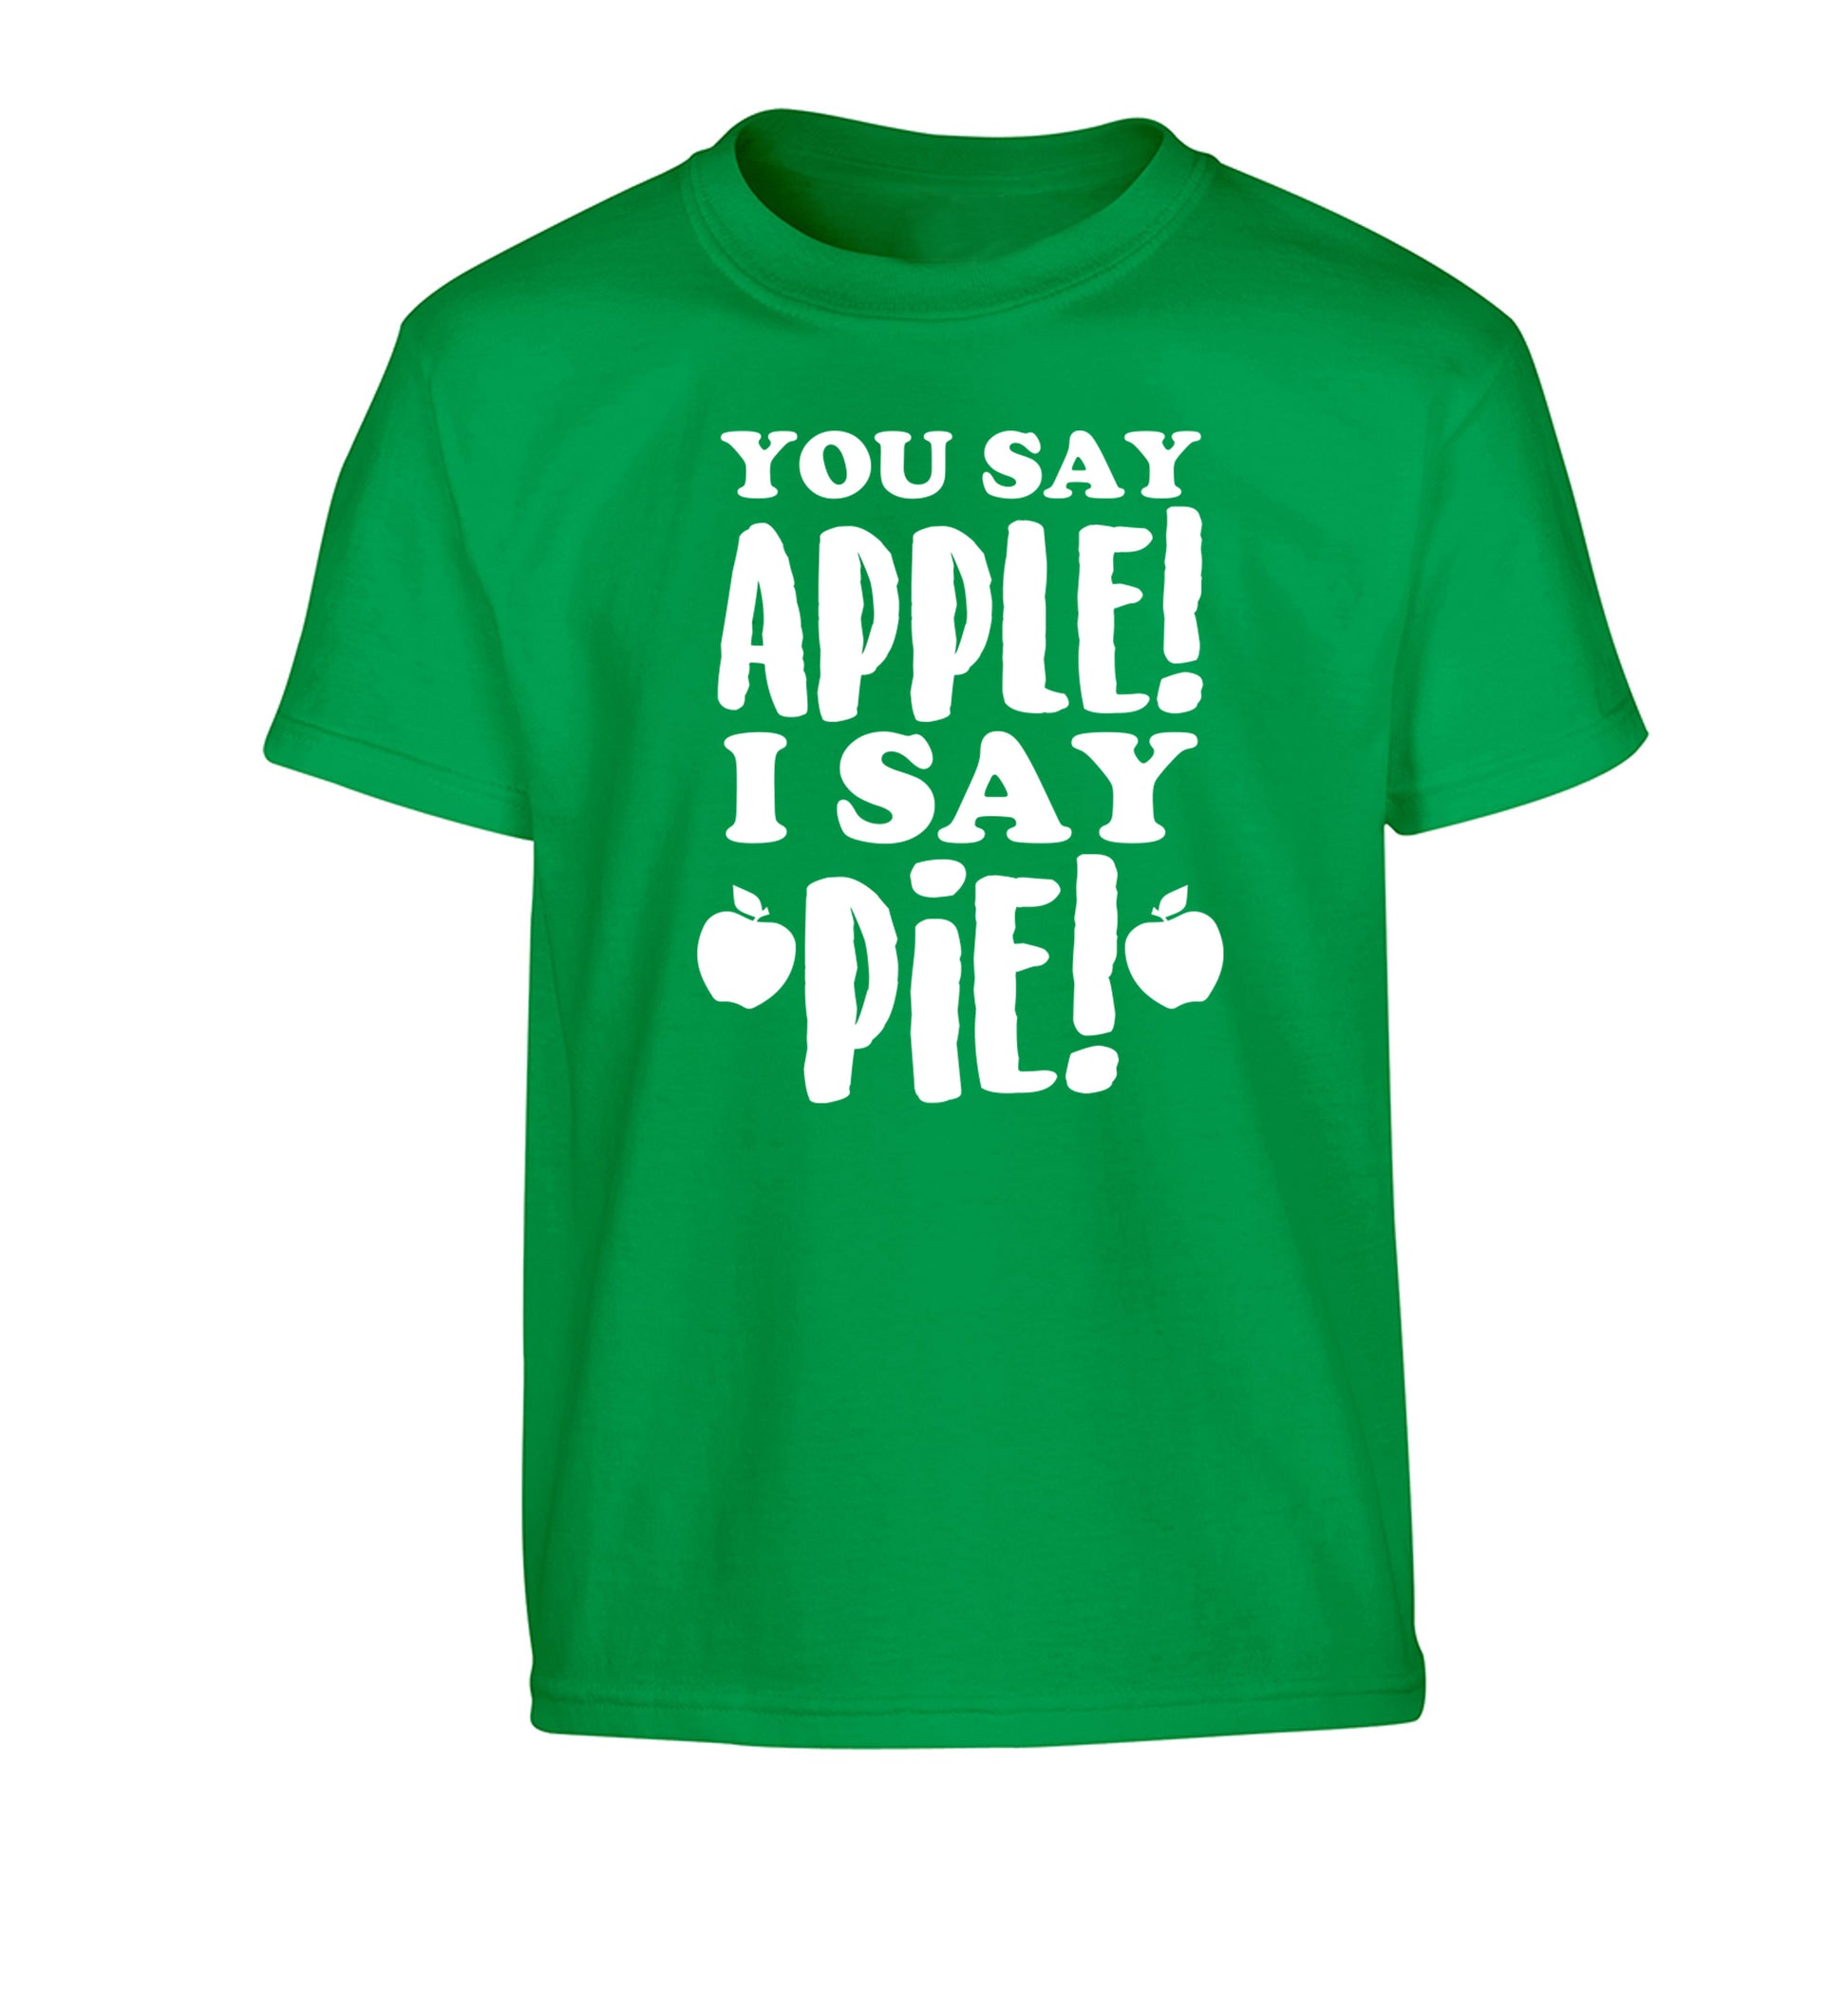 You say apple I say pie! Children's green Tshirt 12-14 Years